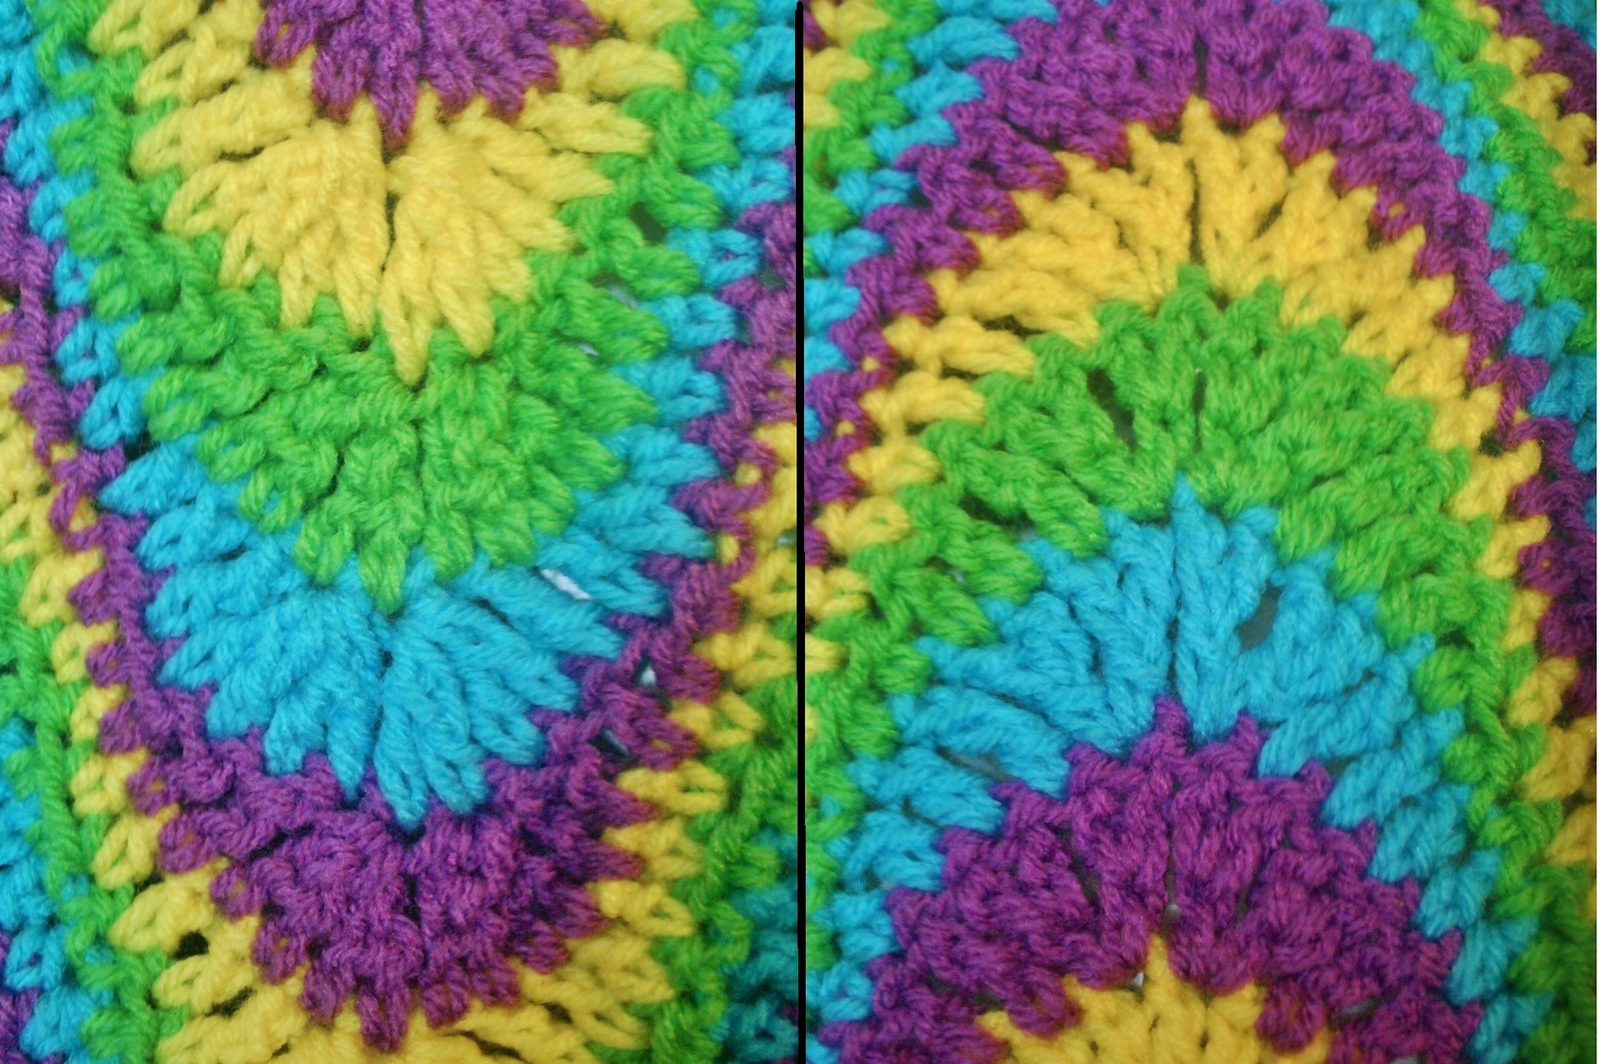 Crochet Ripple Afghan Patterns Three 3 Exaggerated Ripple Afghan Crochet And 14 Similar Items